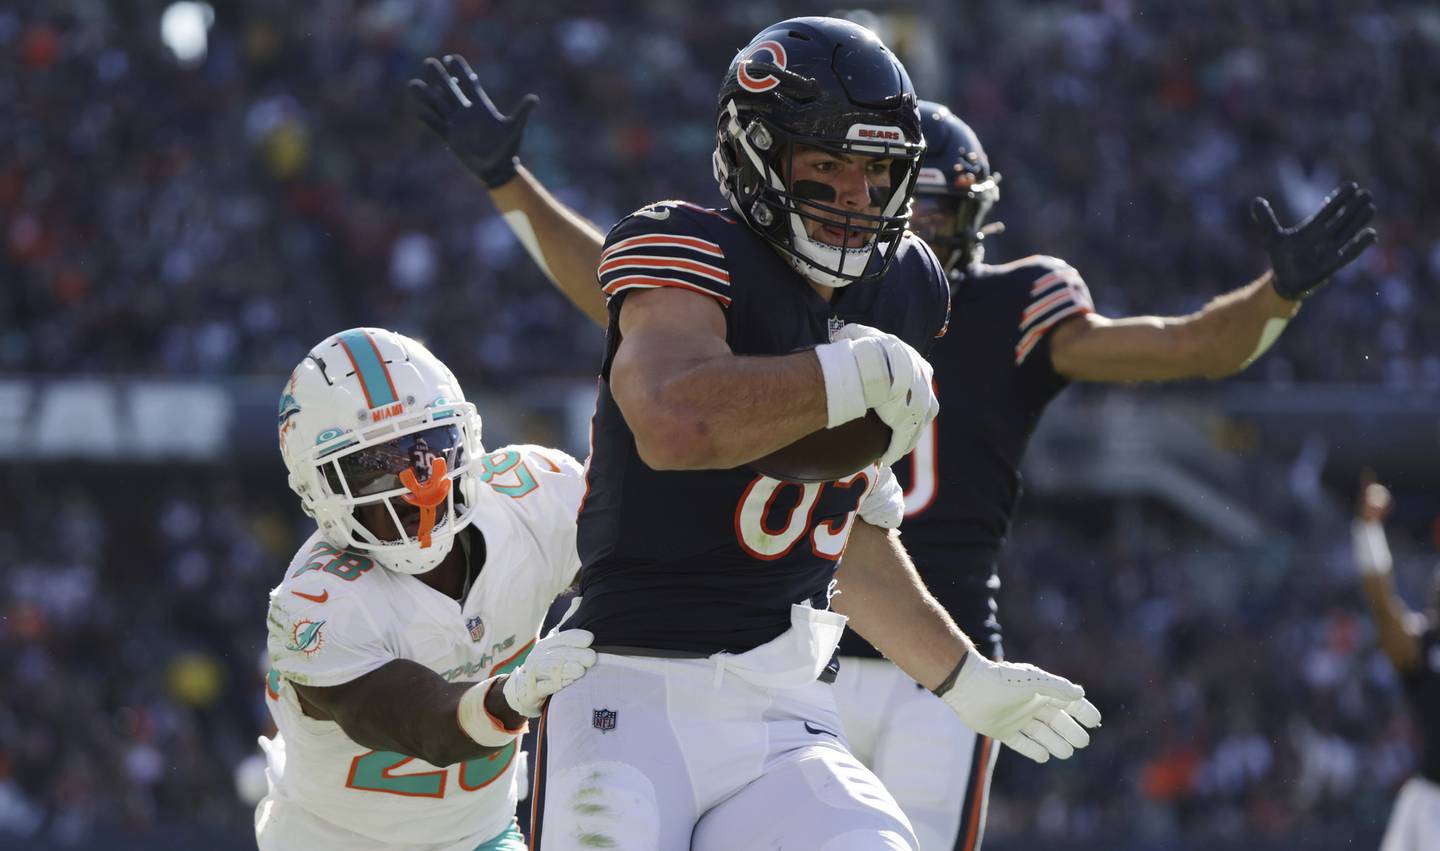 Bears tight end Cole Kmet scores a touchdown off a pass from Justin Fields in the second quarter against the Dolphins on Nov. 6, 2022, at Soldier Field. 